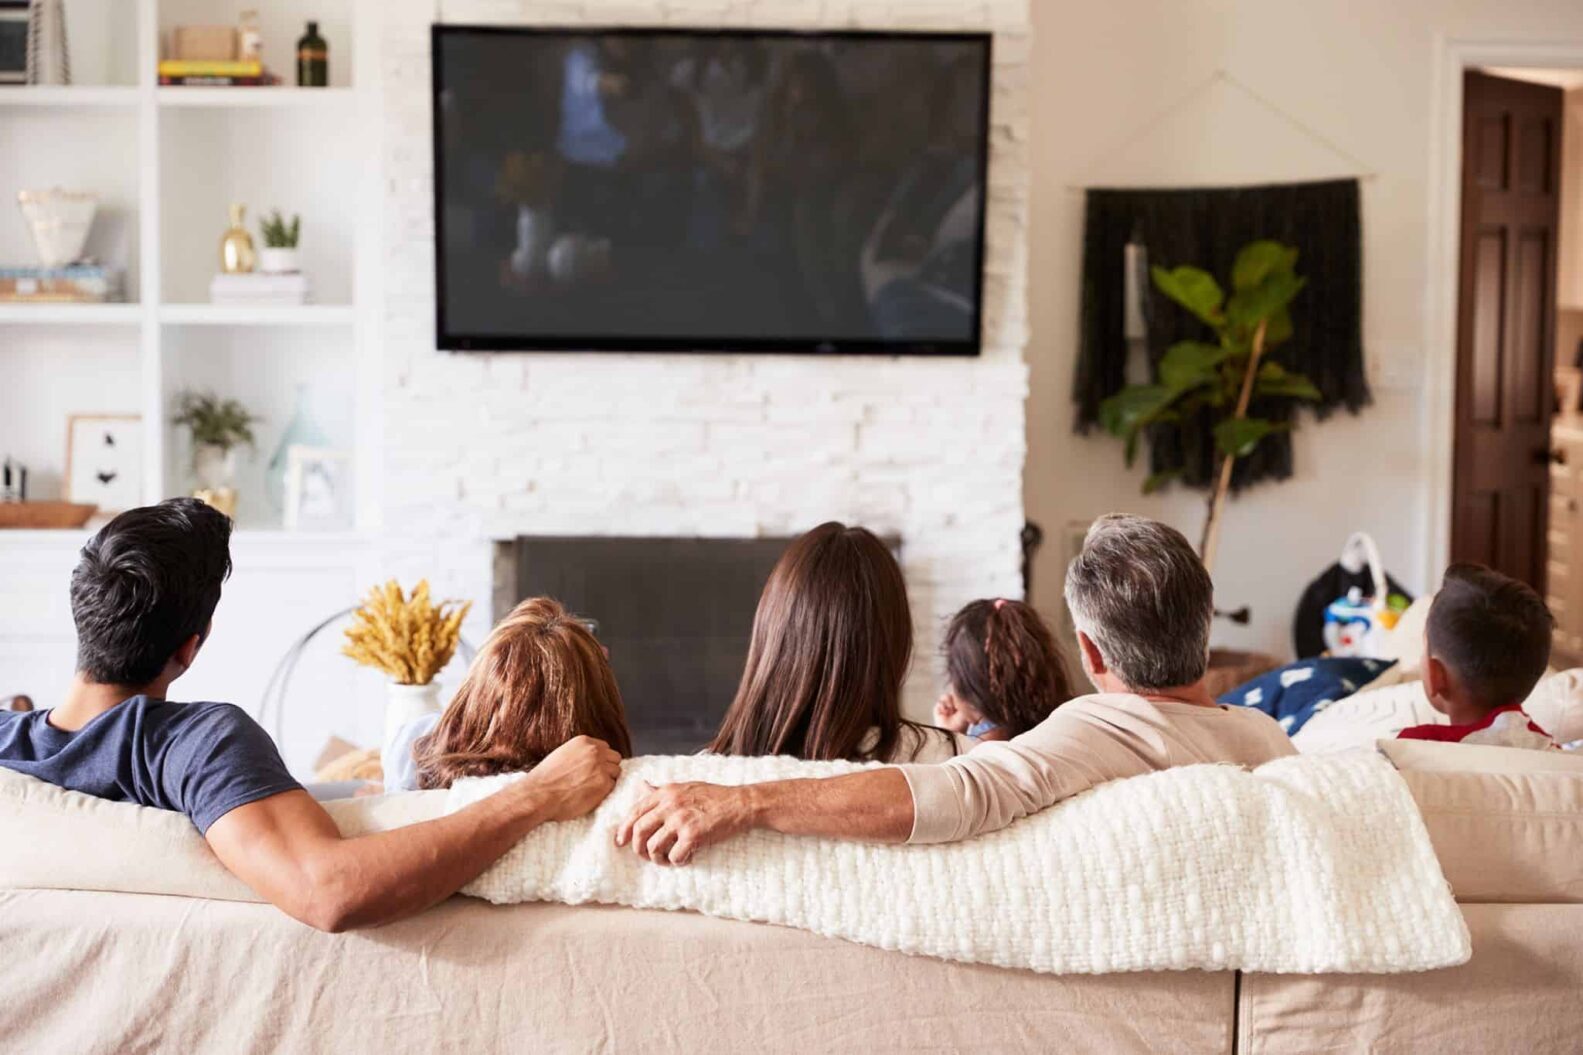 Find TV Installation professionals in Dallas. Take advantage of affordable prices now.